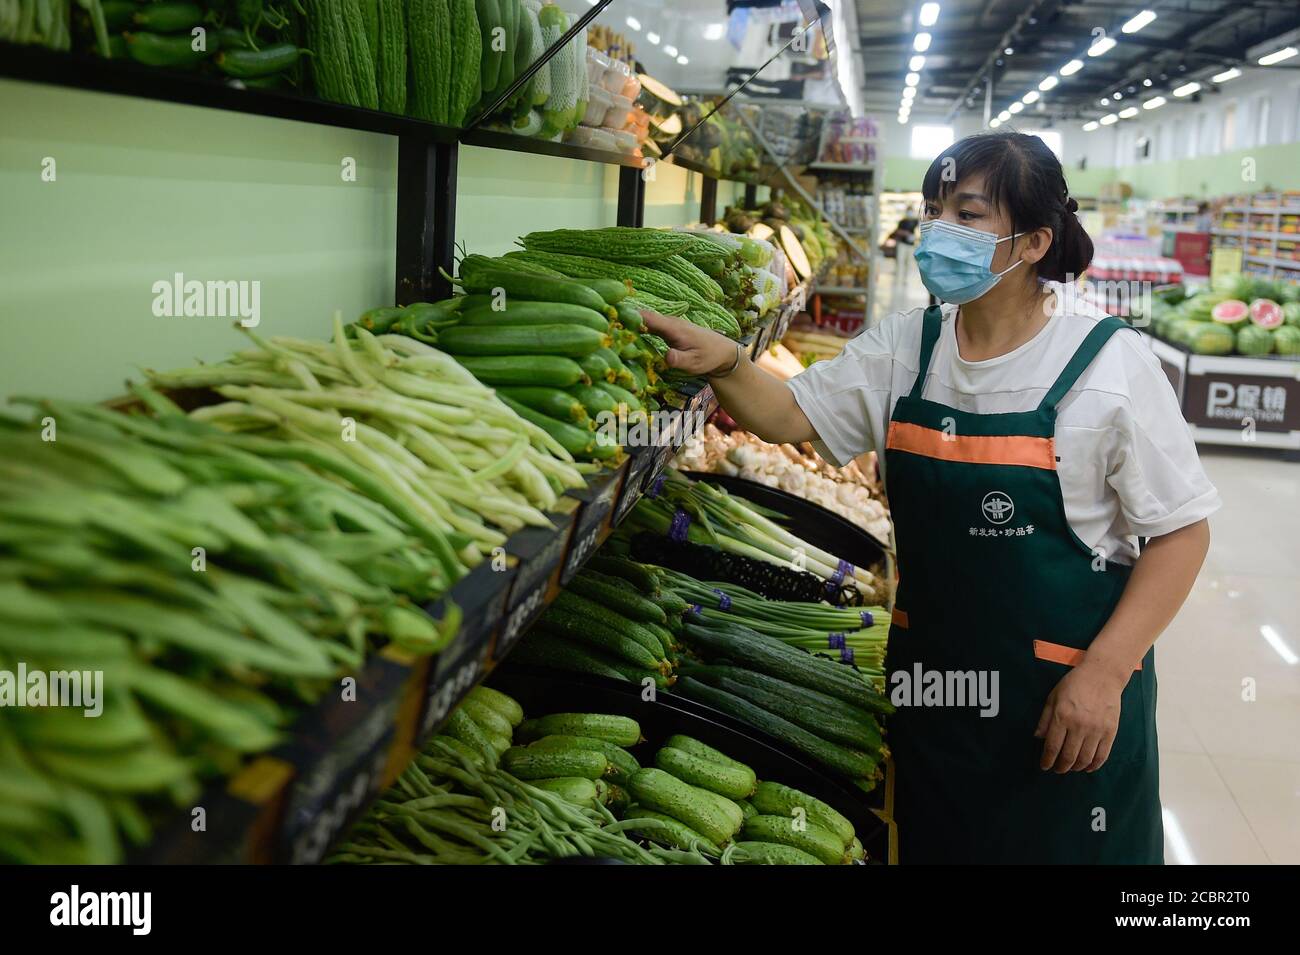 200815) -- BEIJING, Aug. 15, 2020 (Xinhua) -- A staff member puts  vegetables in order at a retail grocery store which has been set up  recently next to the Xinfadi wholesale market